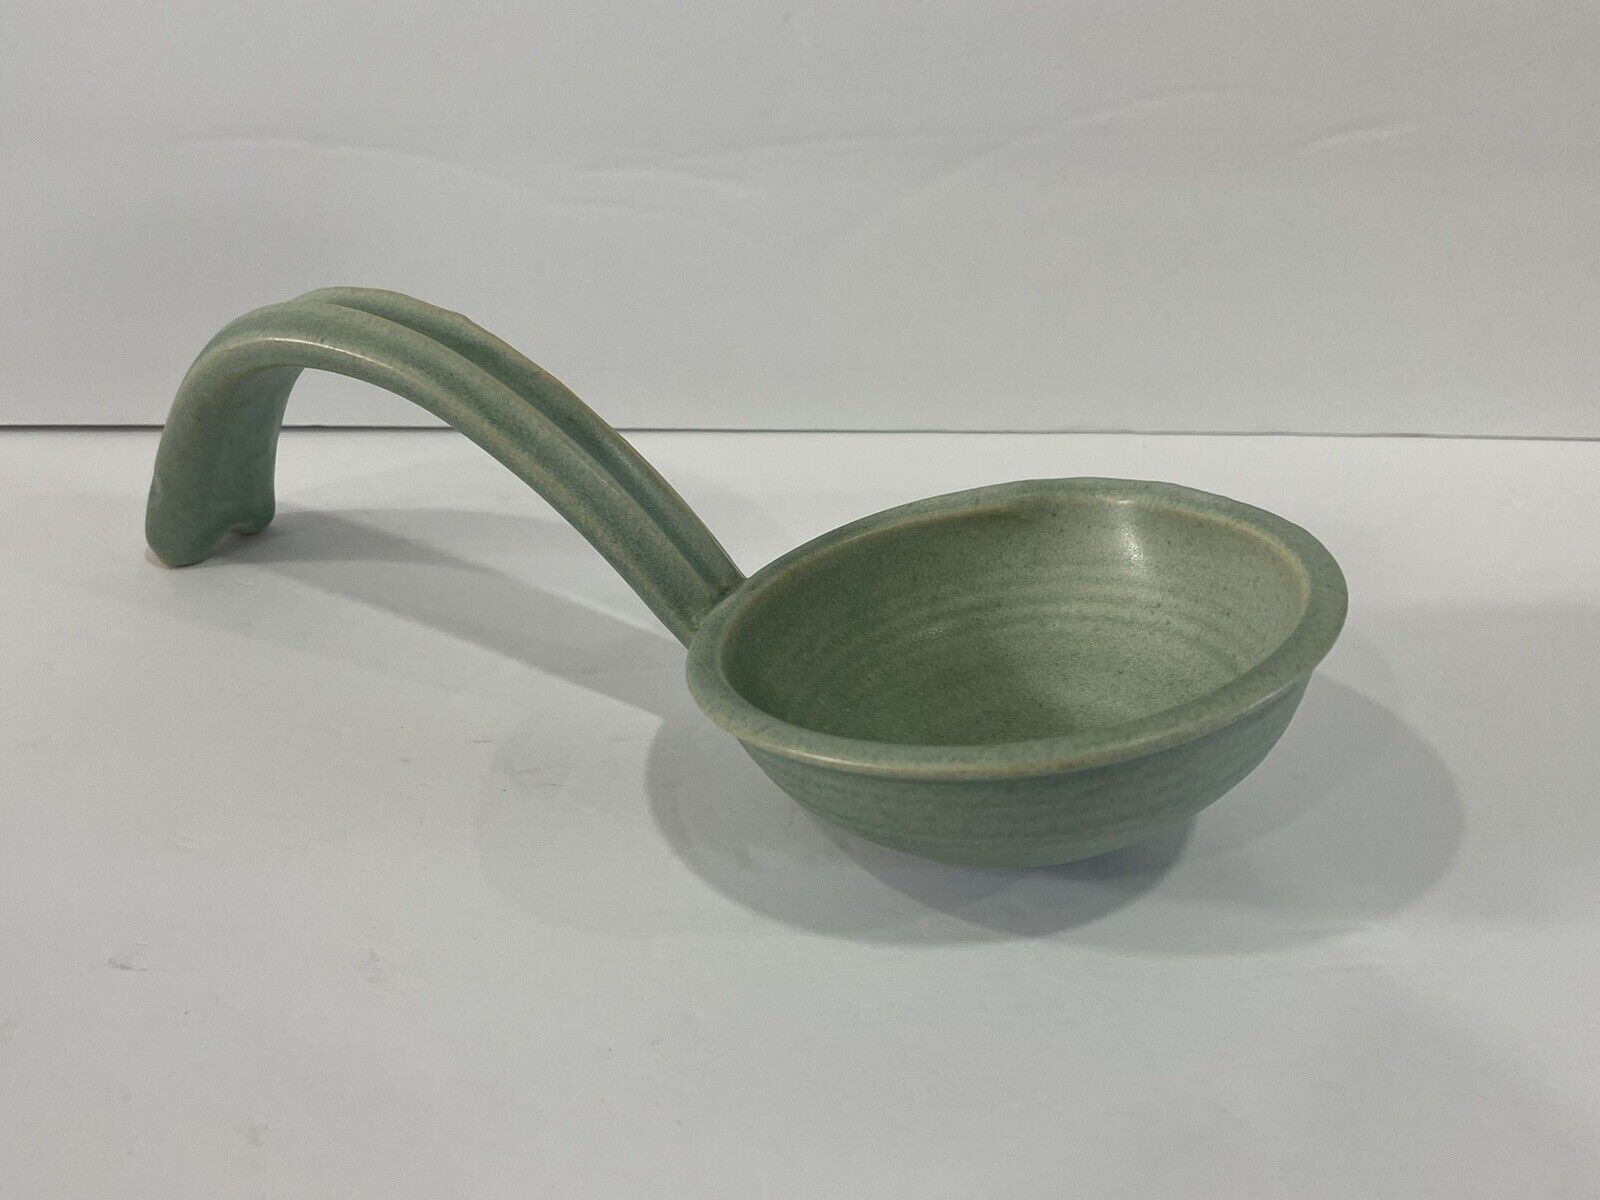 Beautiful Pottery Turquoise Ladle Spoon Rest 10.5” Long